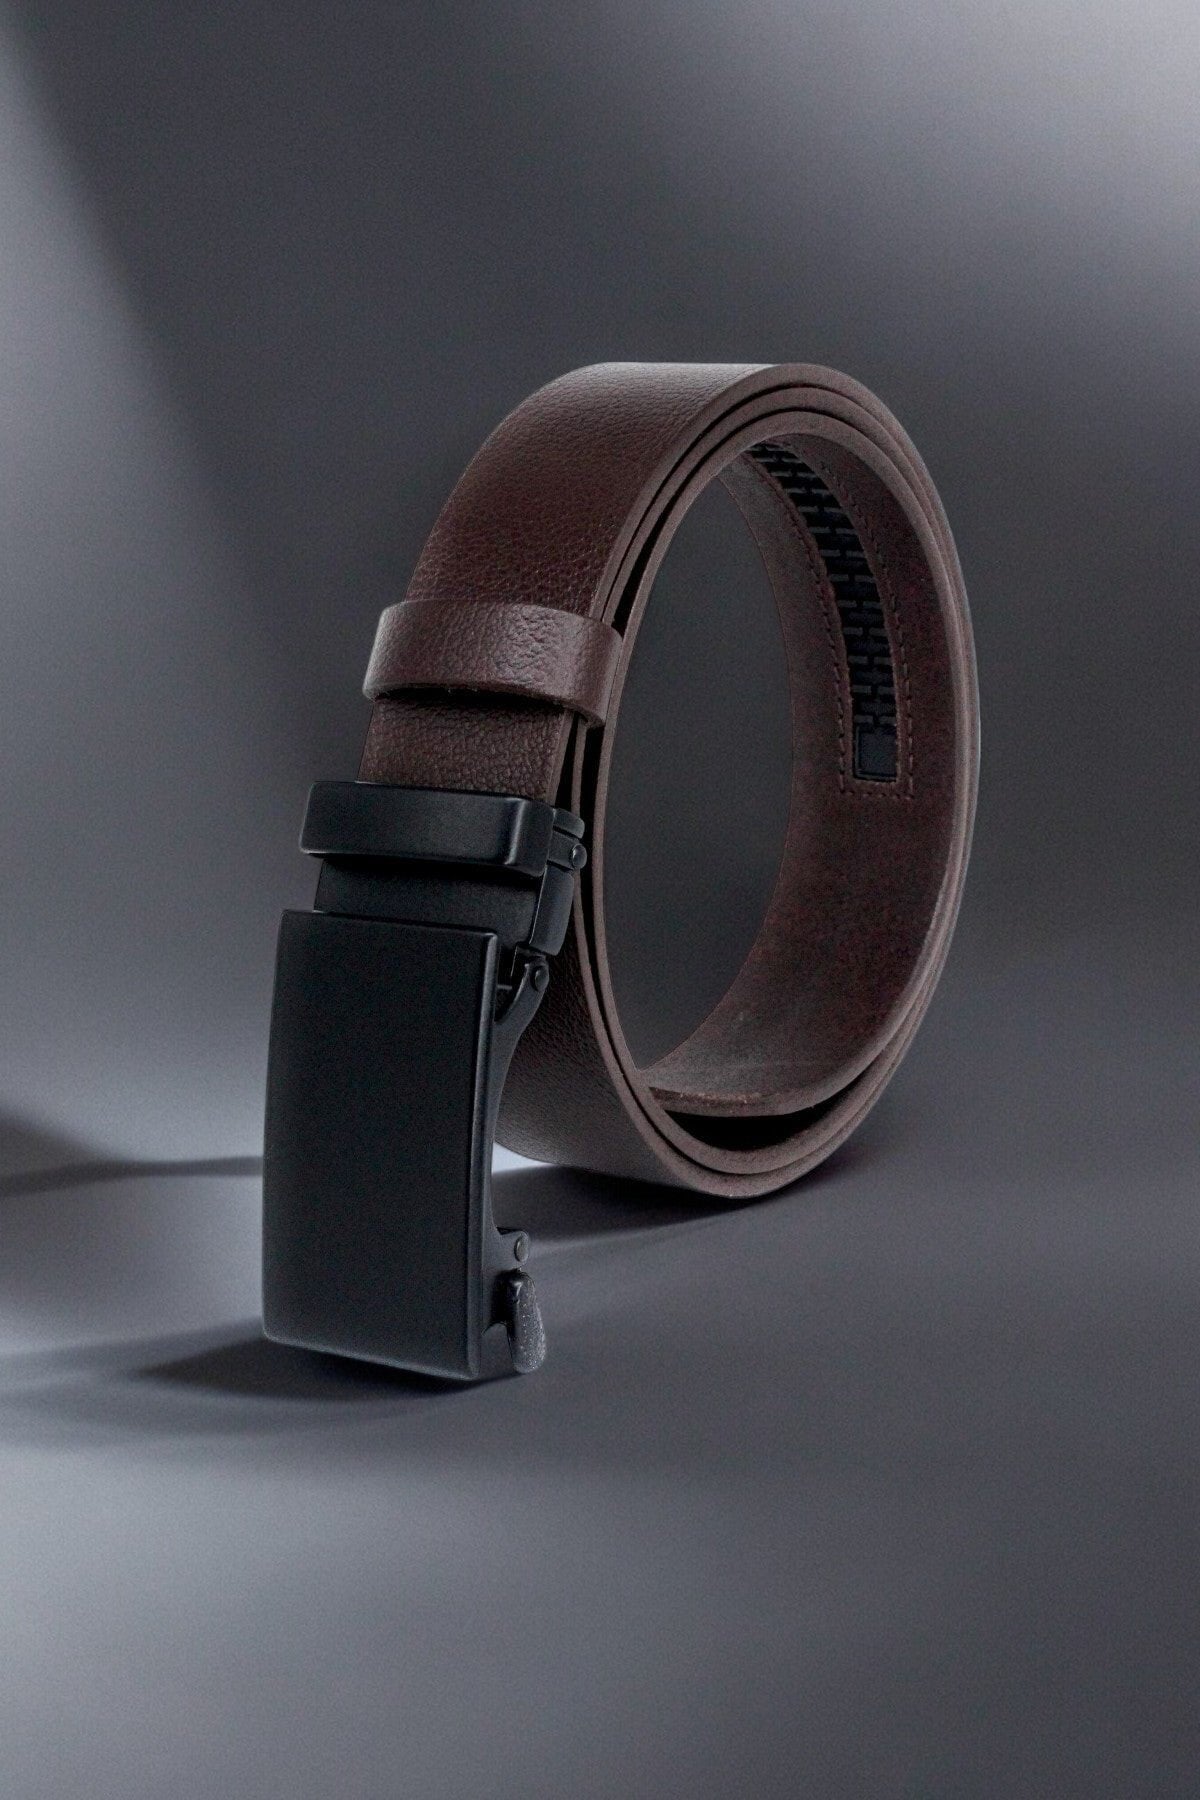 Handmade Leather Belt with Different Color Options  99percenthandmade 32" - 34" Waist inches (70cm-80cm)-Small Model 1 Brown 